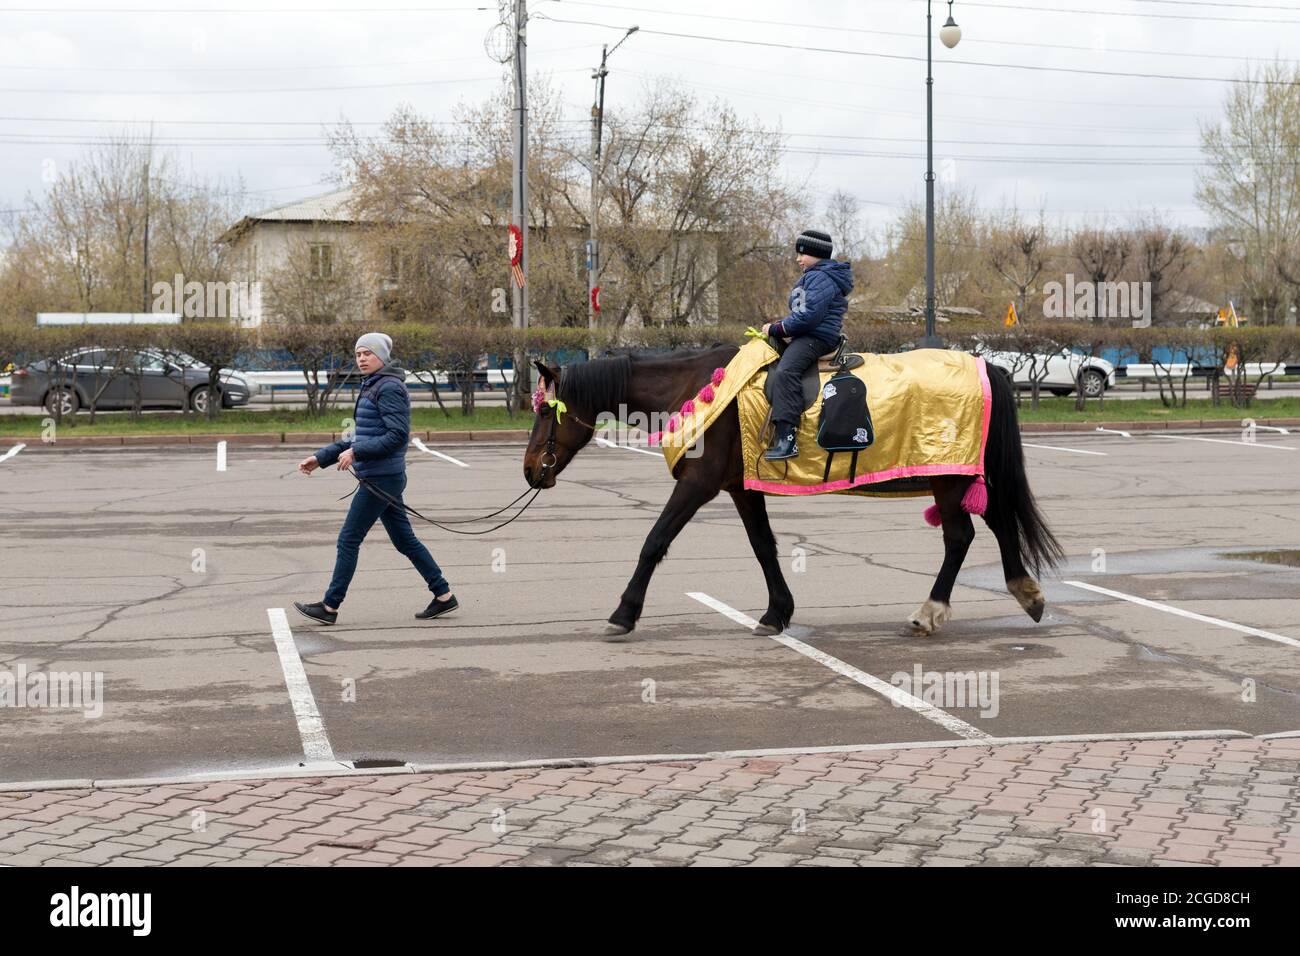 A young man leads an elegant horse, on which a boy rides on the street, during the celebration of Victory Day WWII. Krasnoyarsk. Stock Photo